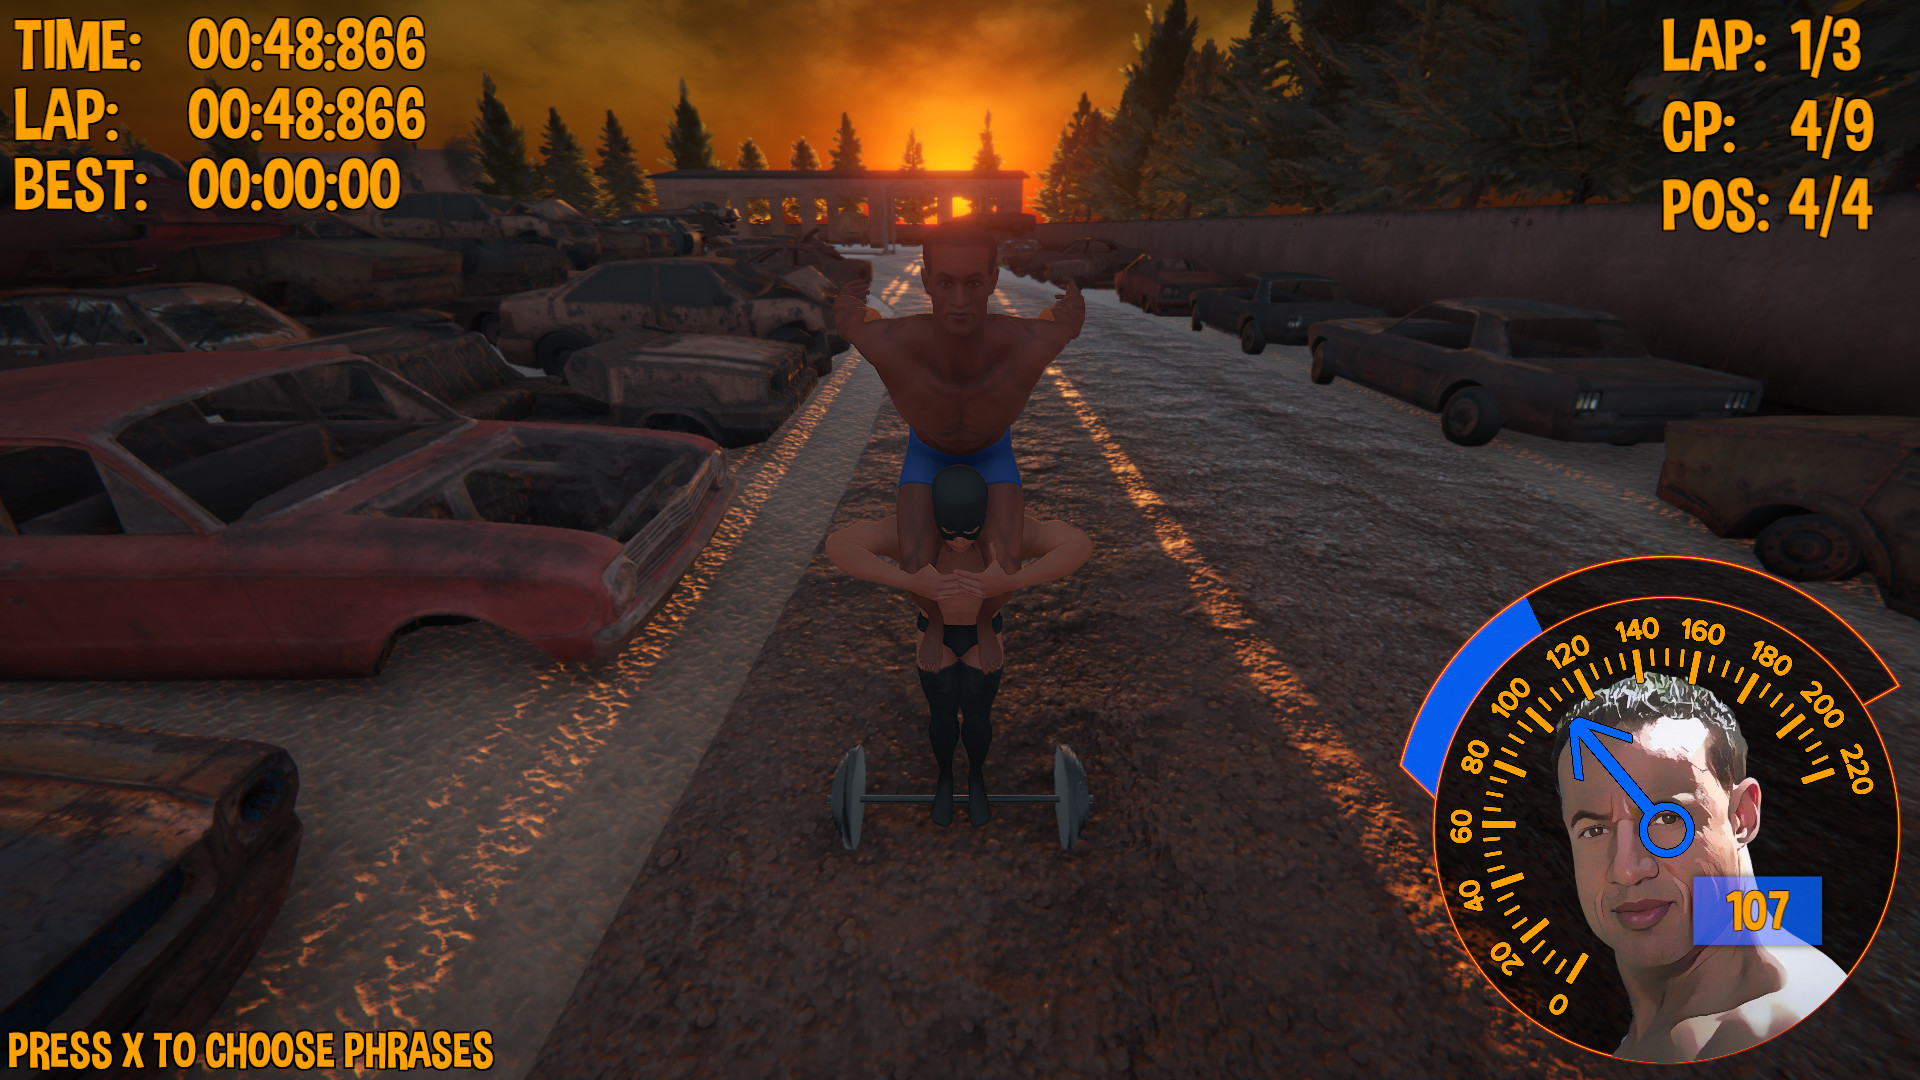 [$ 3.38] Ultimate Muscle Roller Championship Steam CD Key